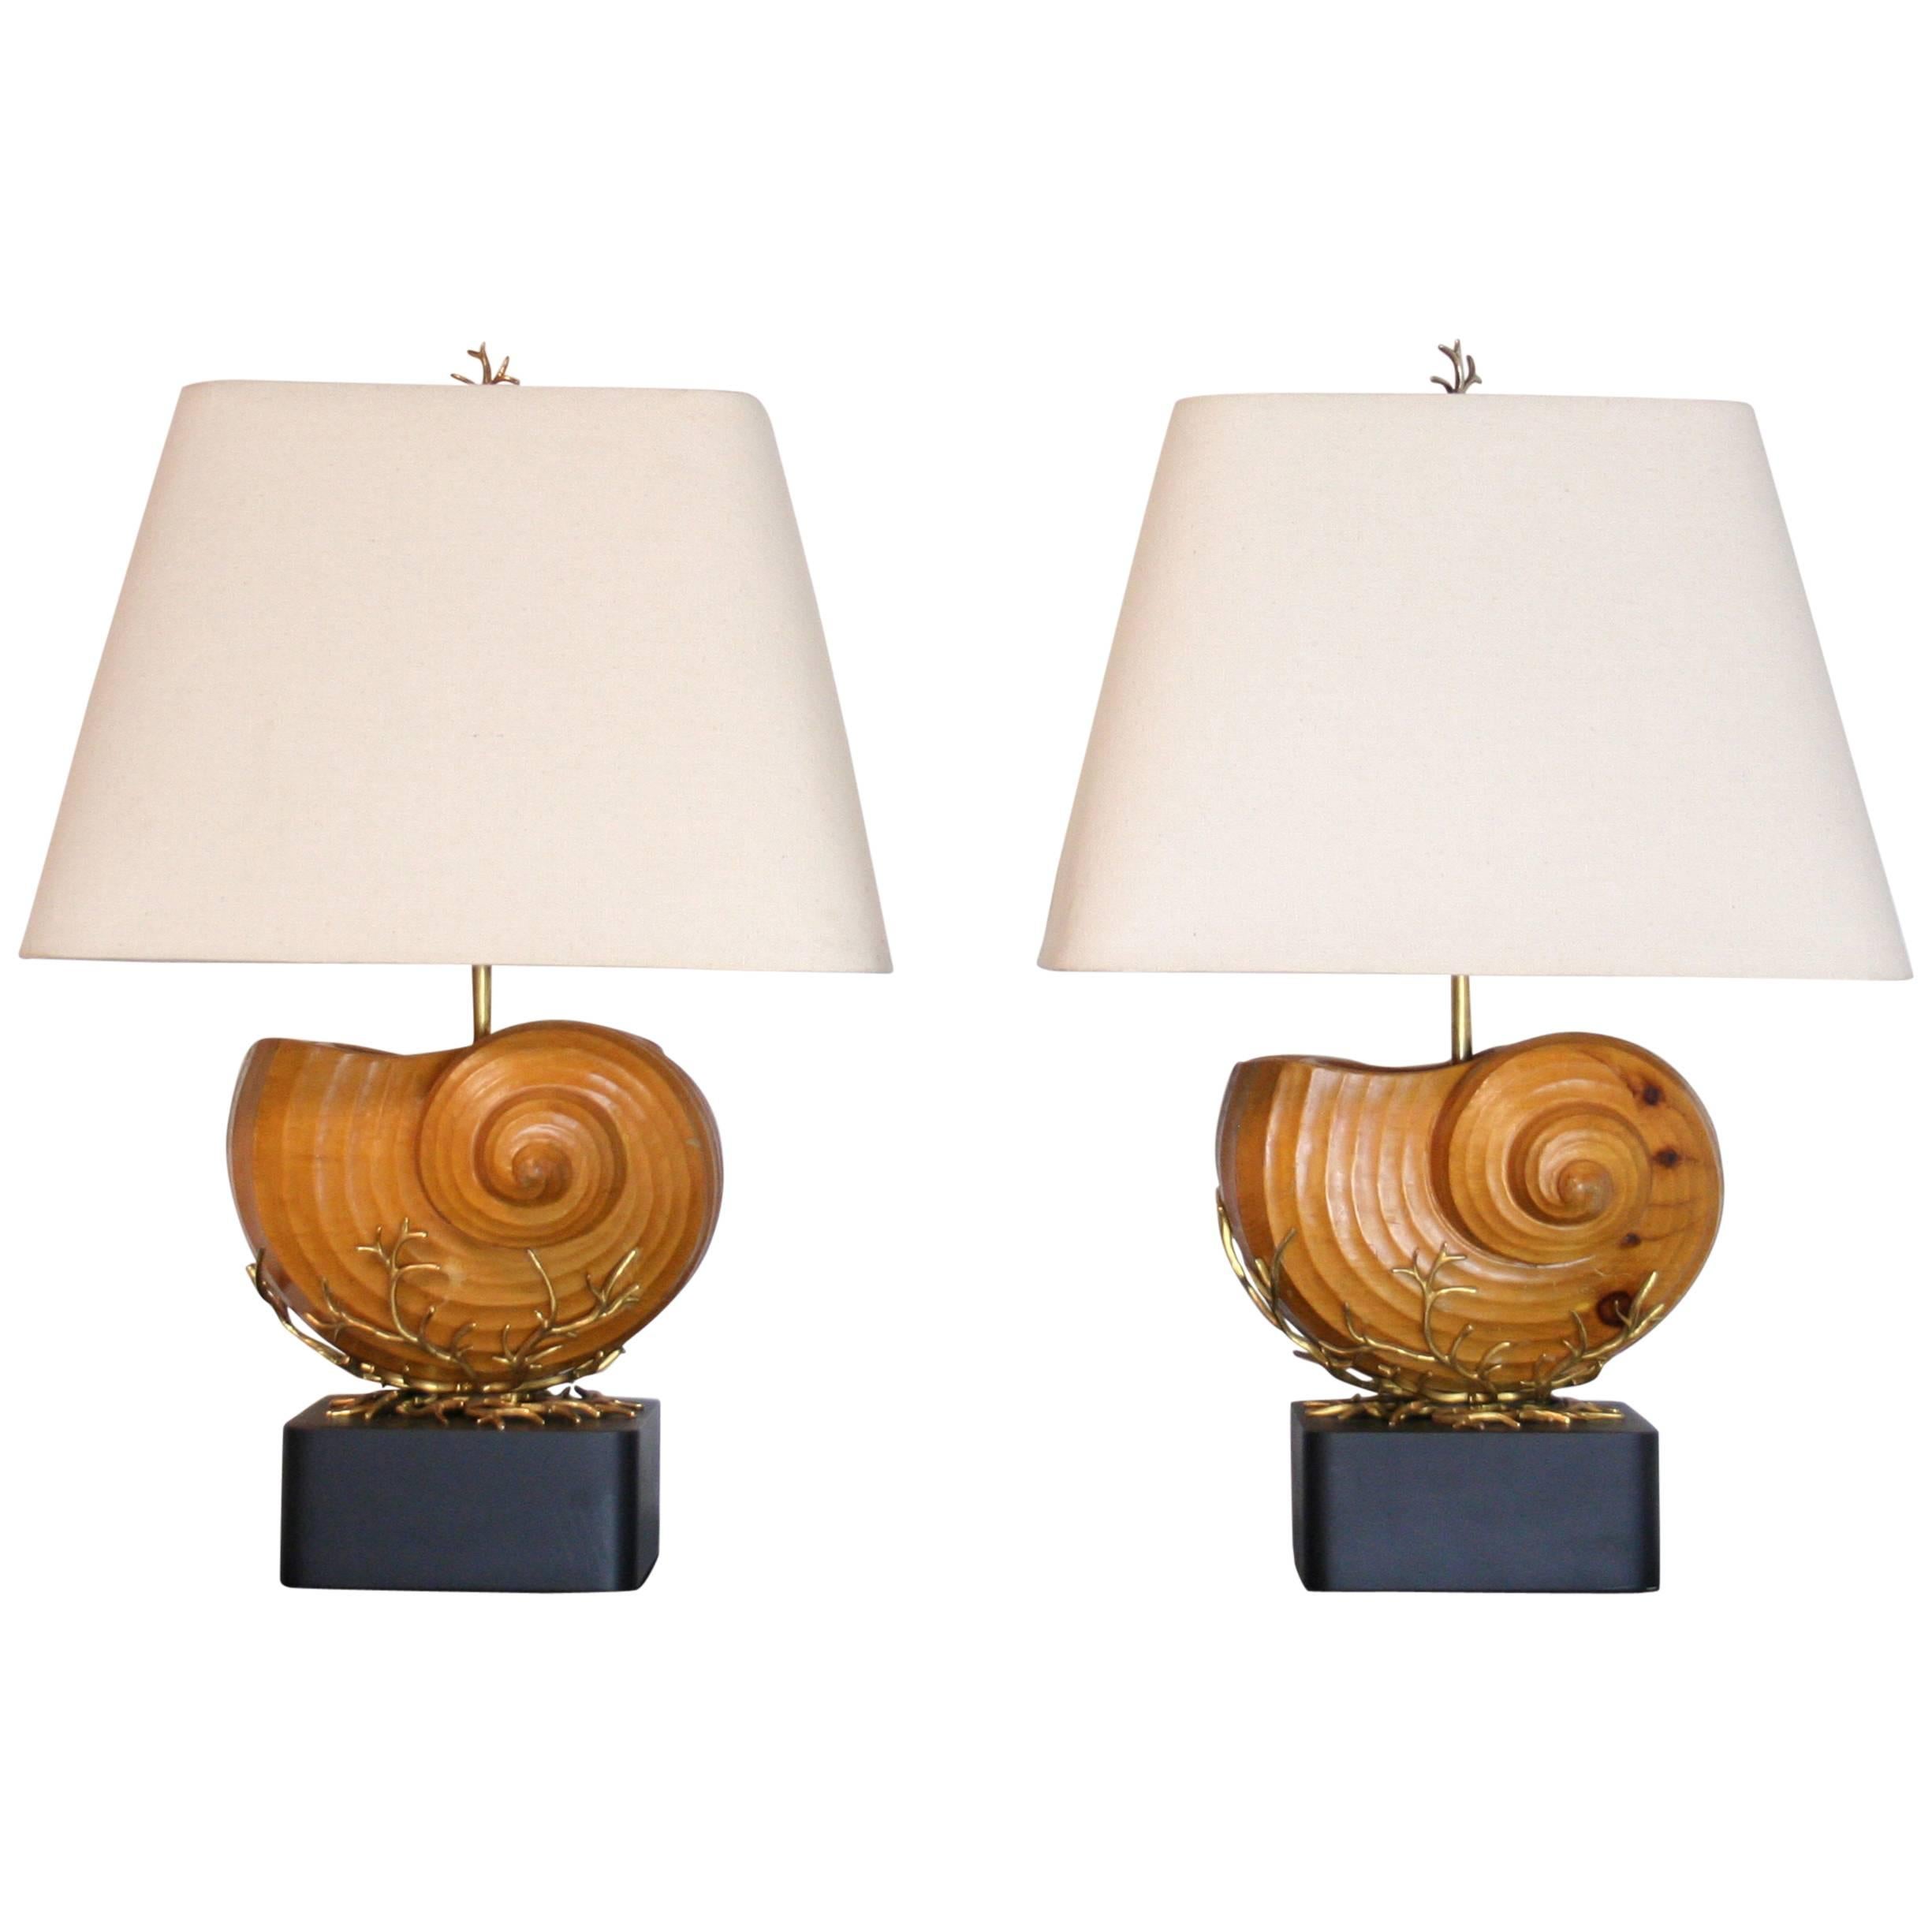 Pair of Carved Wood Nautilus Shell Lamps For Sale at 1stDibs